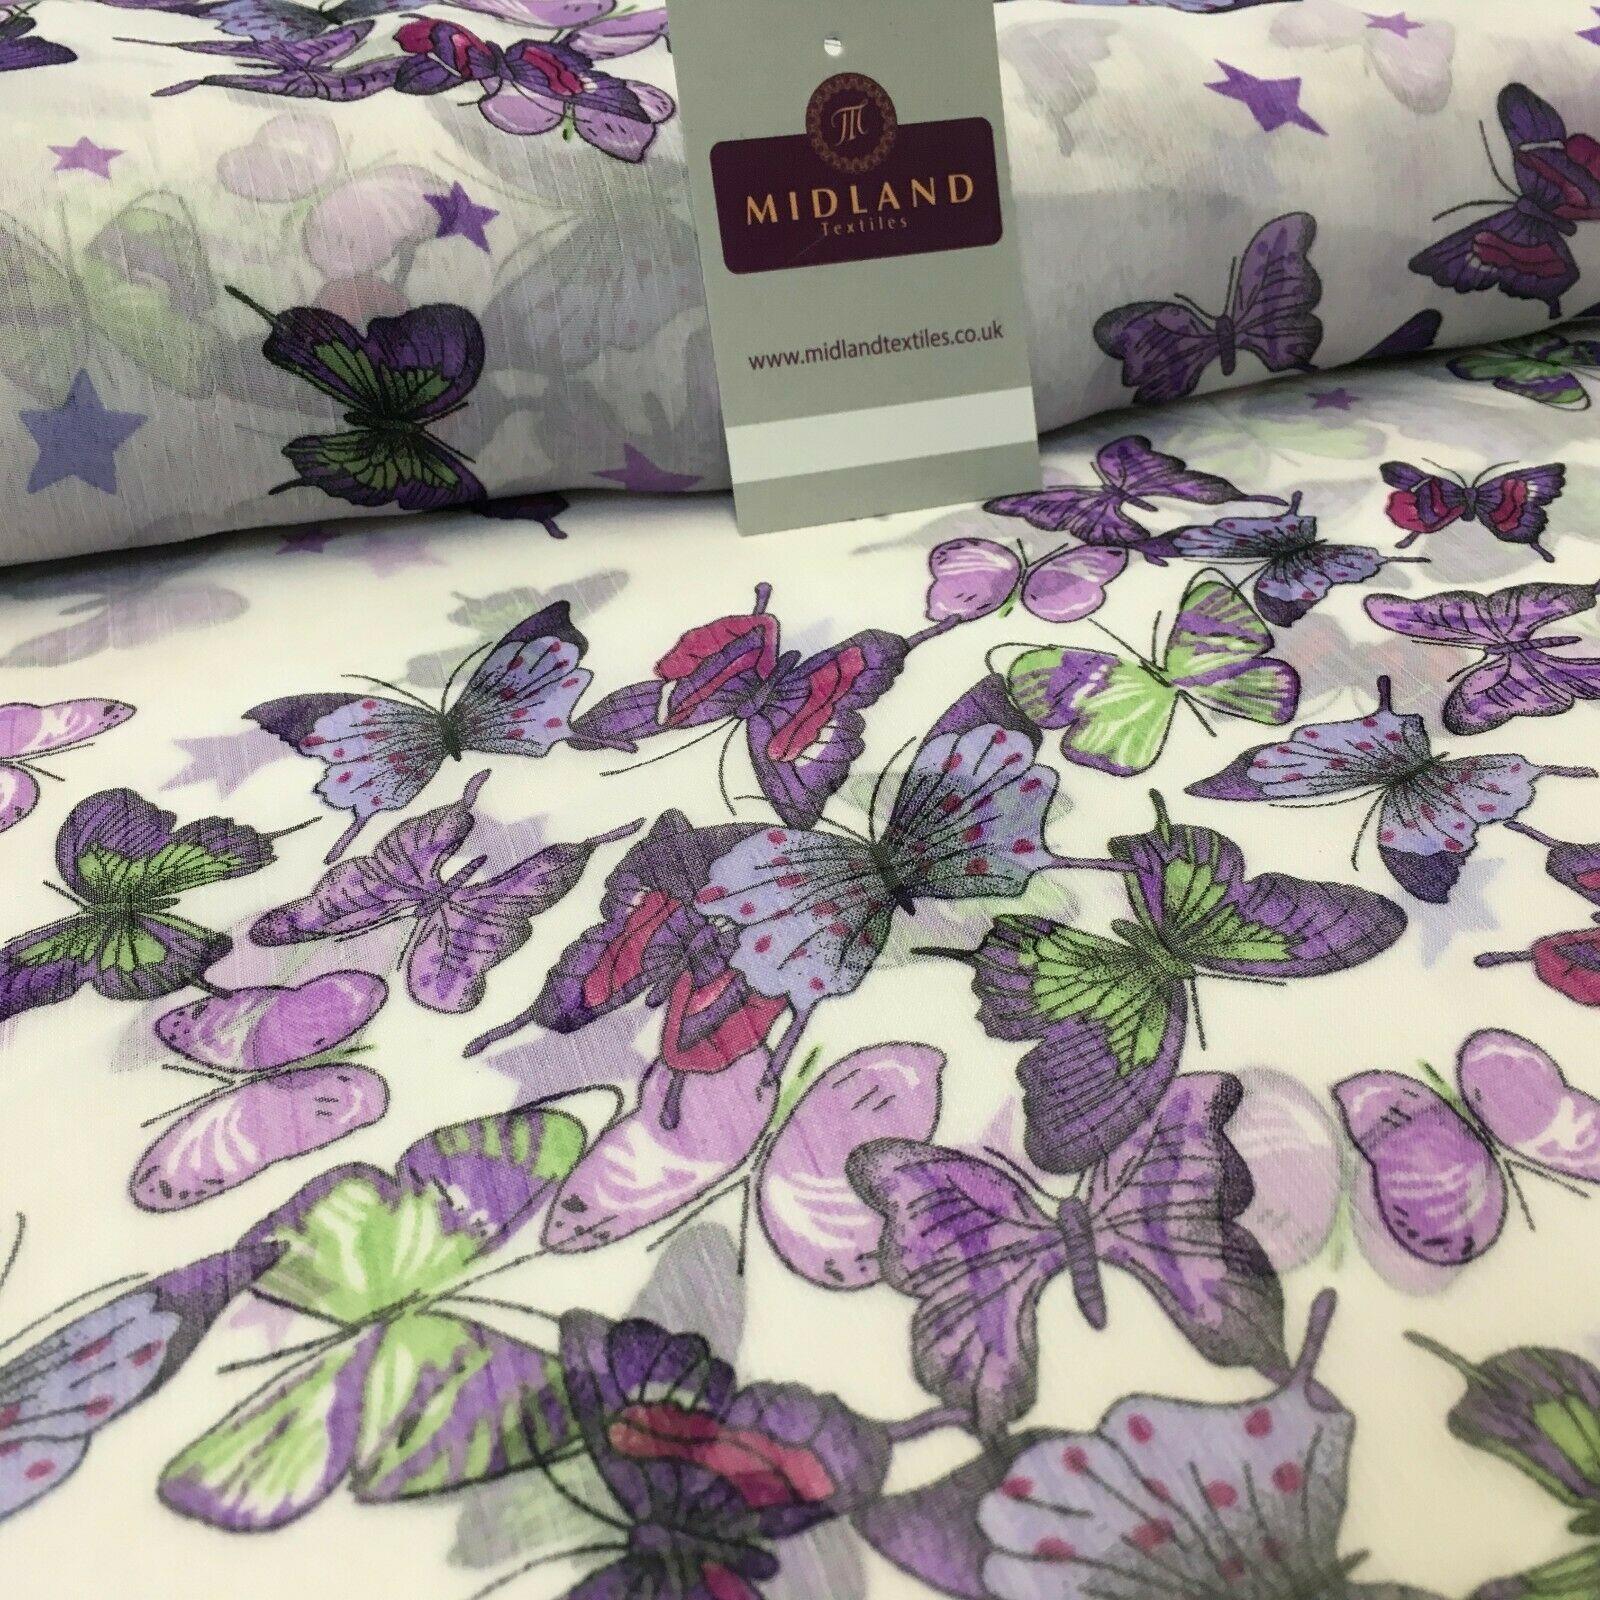 Lilac Butterfly printed Crinkle Georgette Chiffon fabric 150cm wide MK1090-14